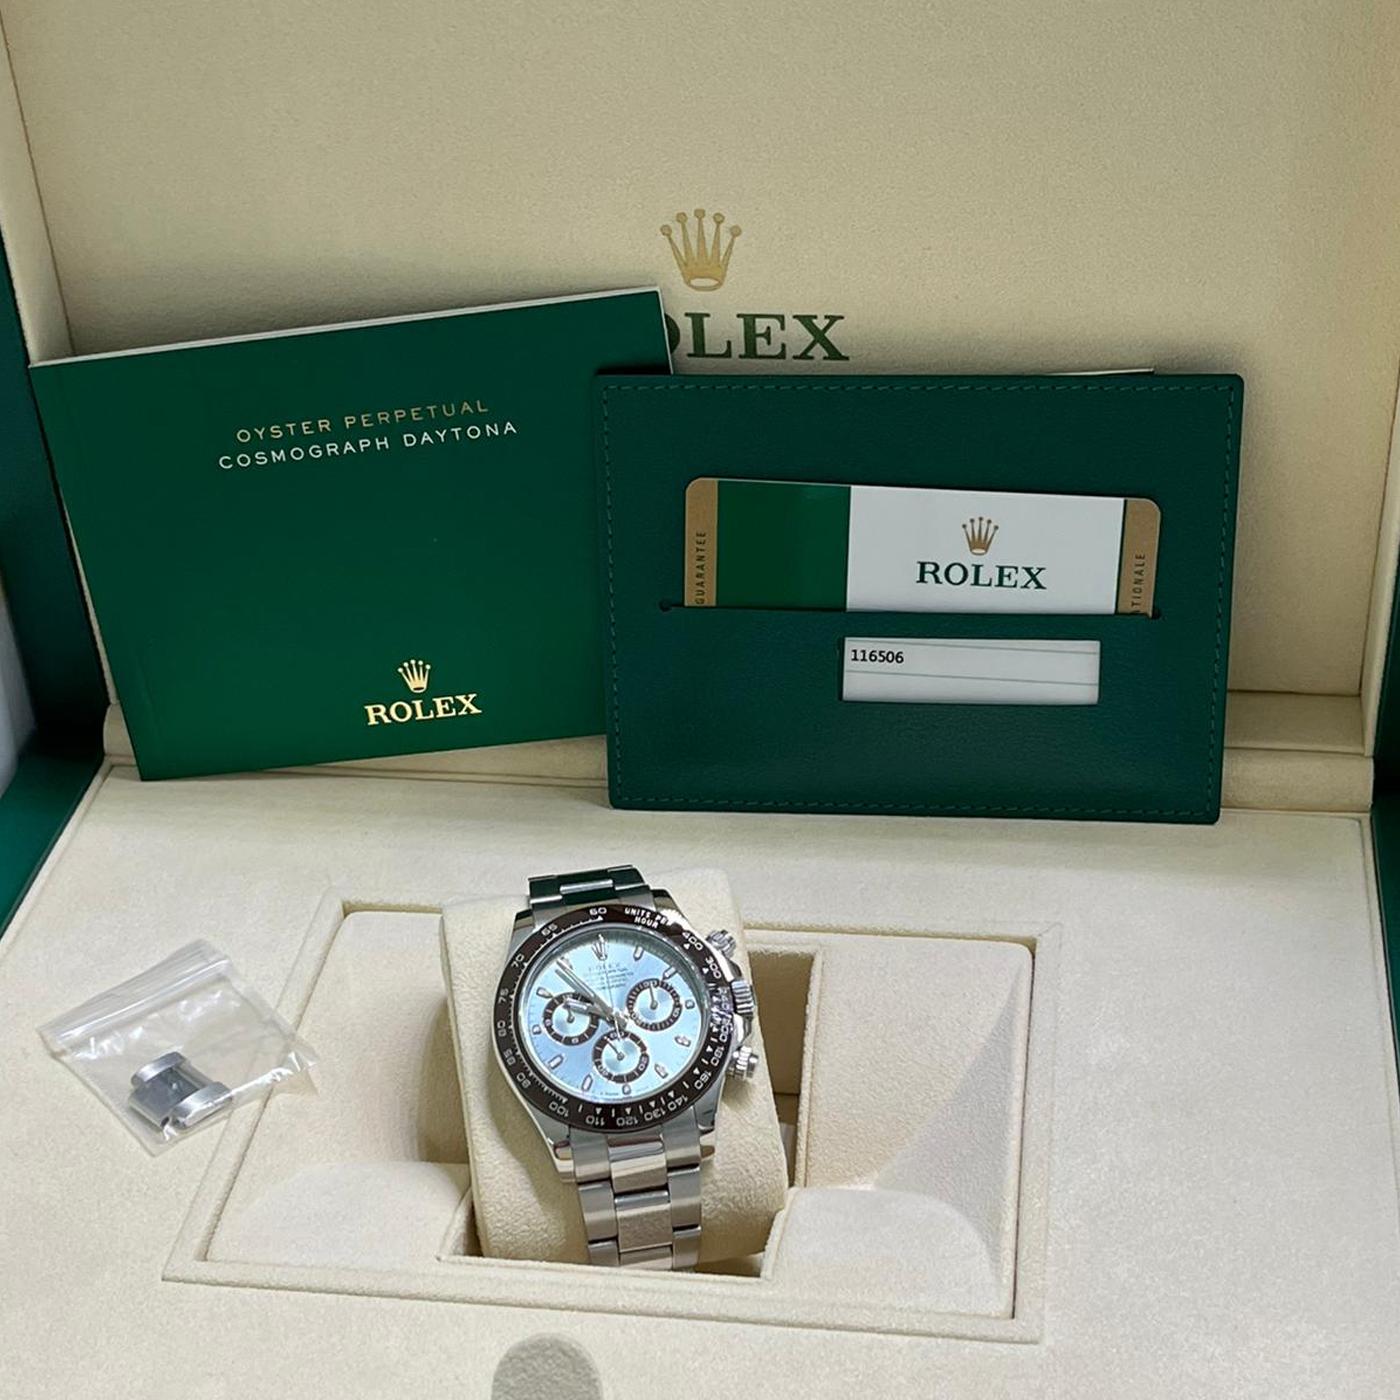 Rolex Daytona Cosmograph Oyster Perpetual Platinum Ice Blue Dial 116506 6